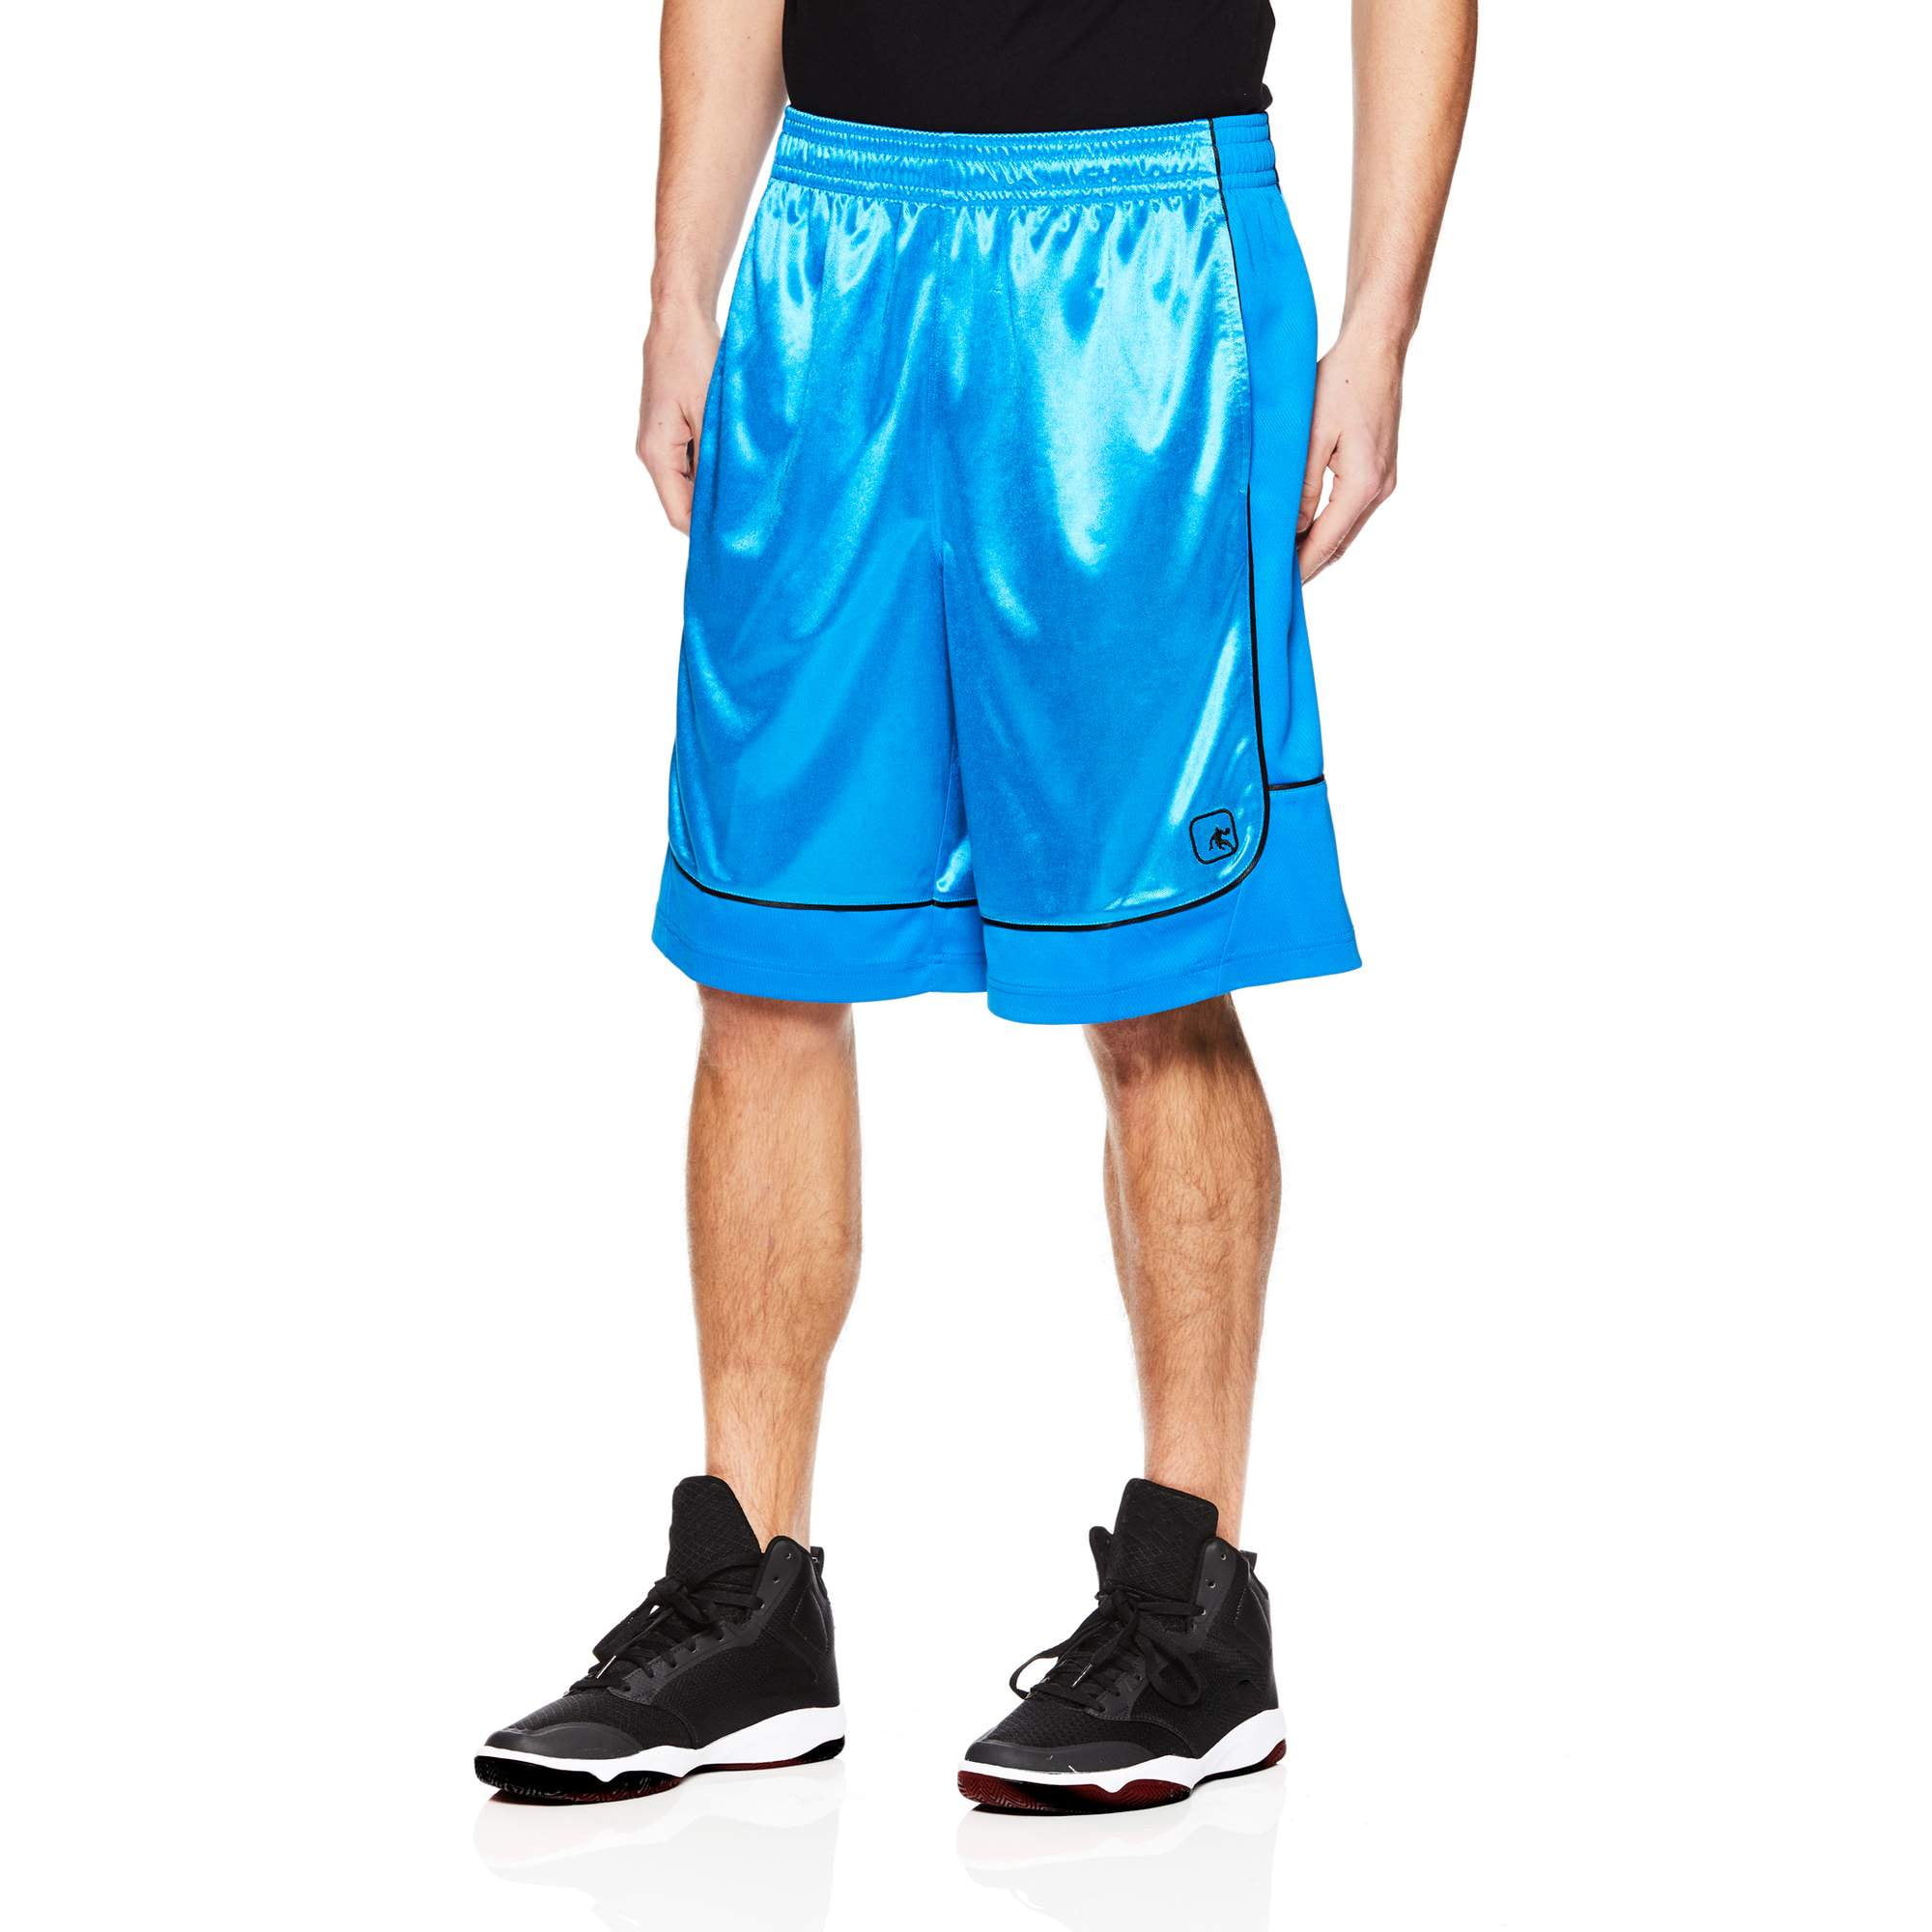 AND1 Big Men's All Court's Basketball Short 